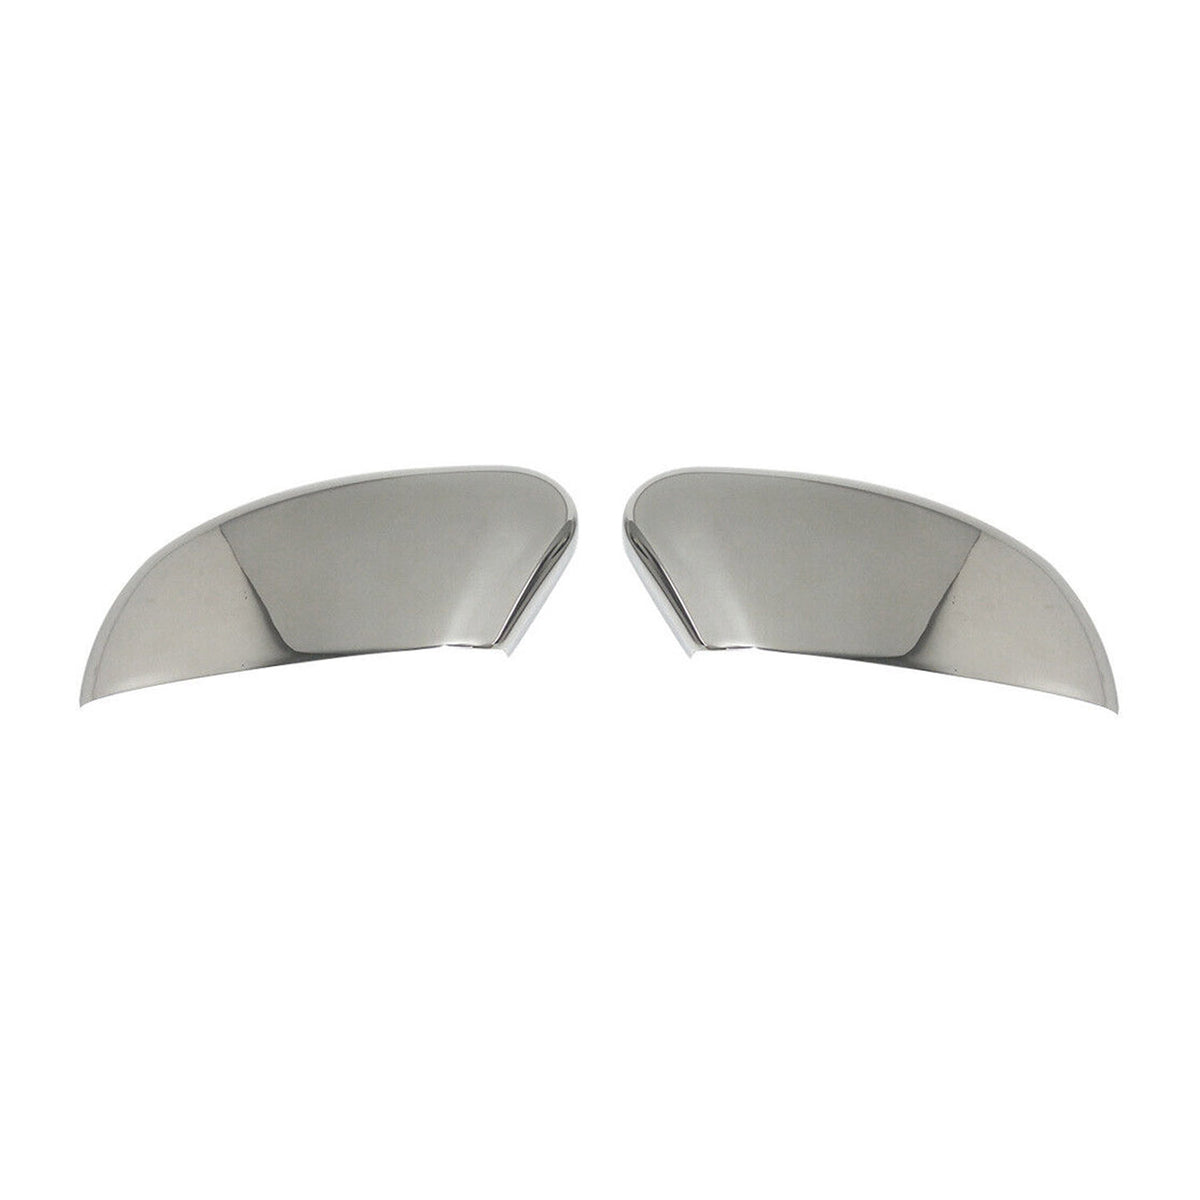 Mirror caps mirror cover for Ford Mondeo 2007-2015 stainless steel silver 2 pieces